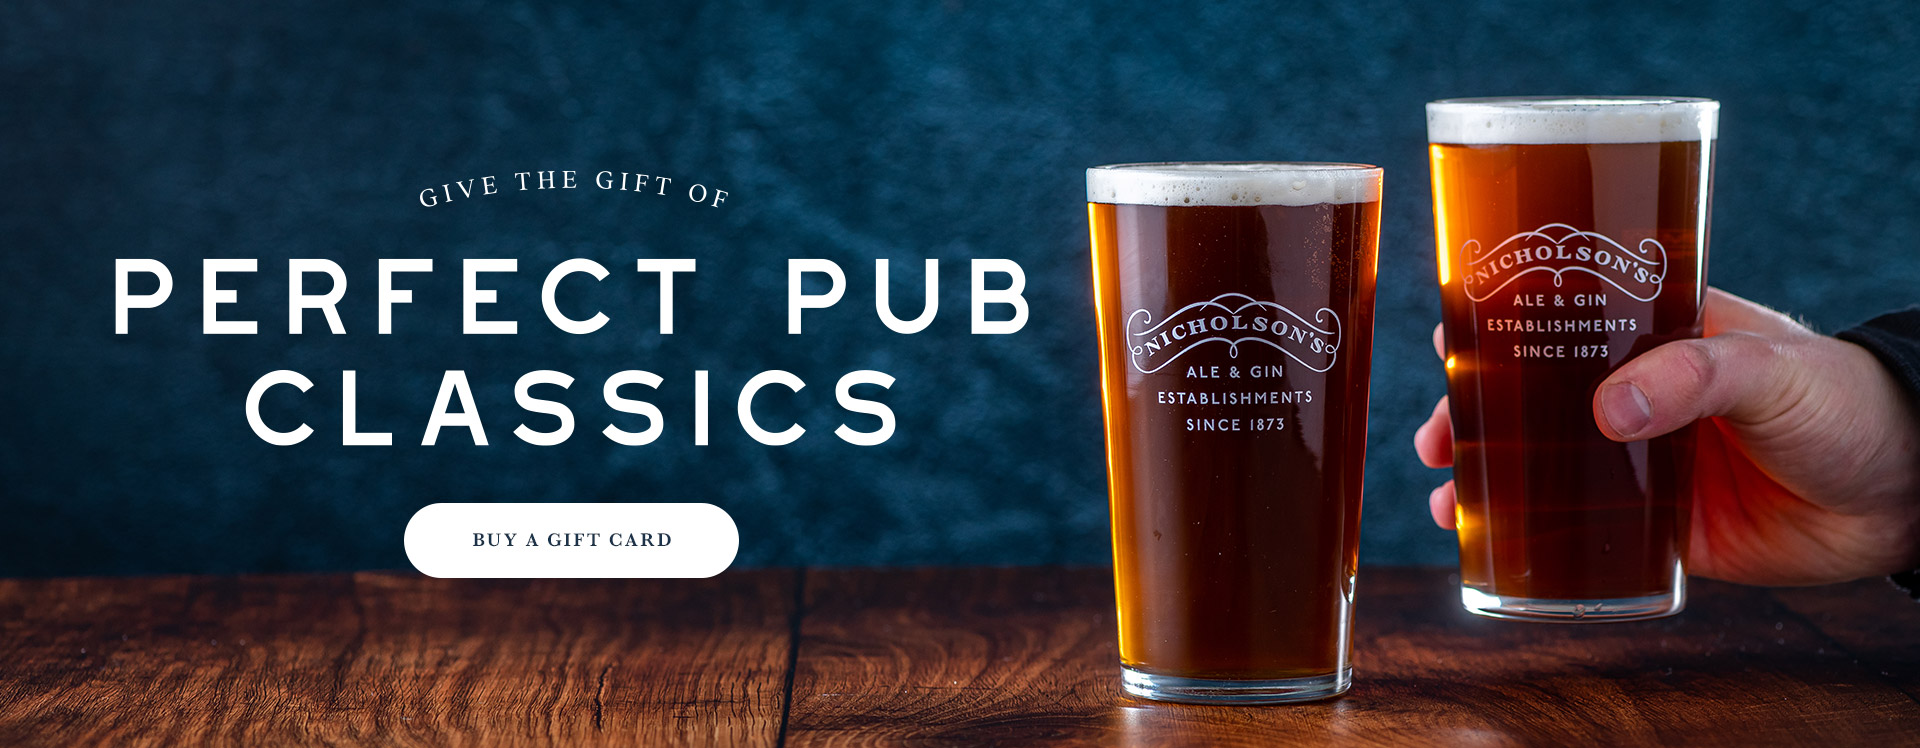 Nicholson’s Pub Gift Voucher at The Argyll Arms in London